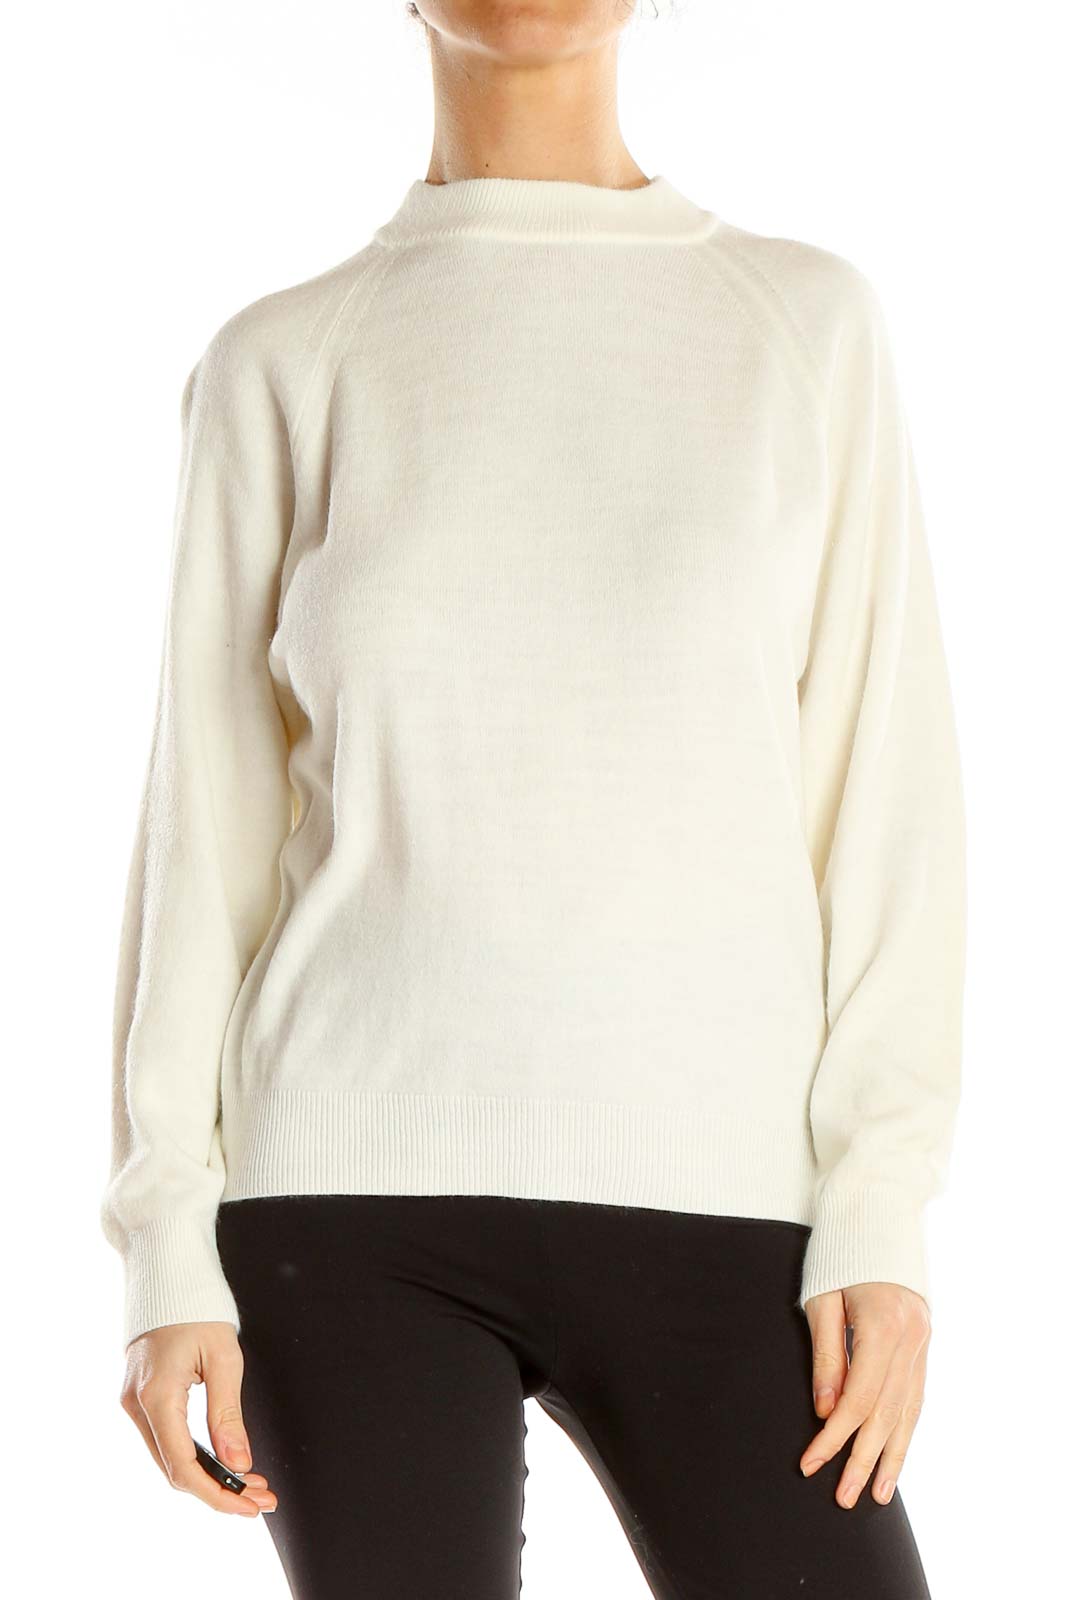 White Mock-Neck Casual Sweater Front